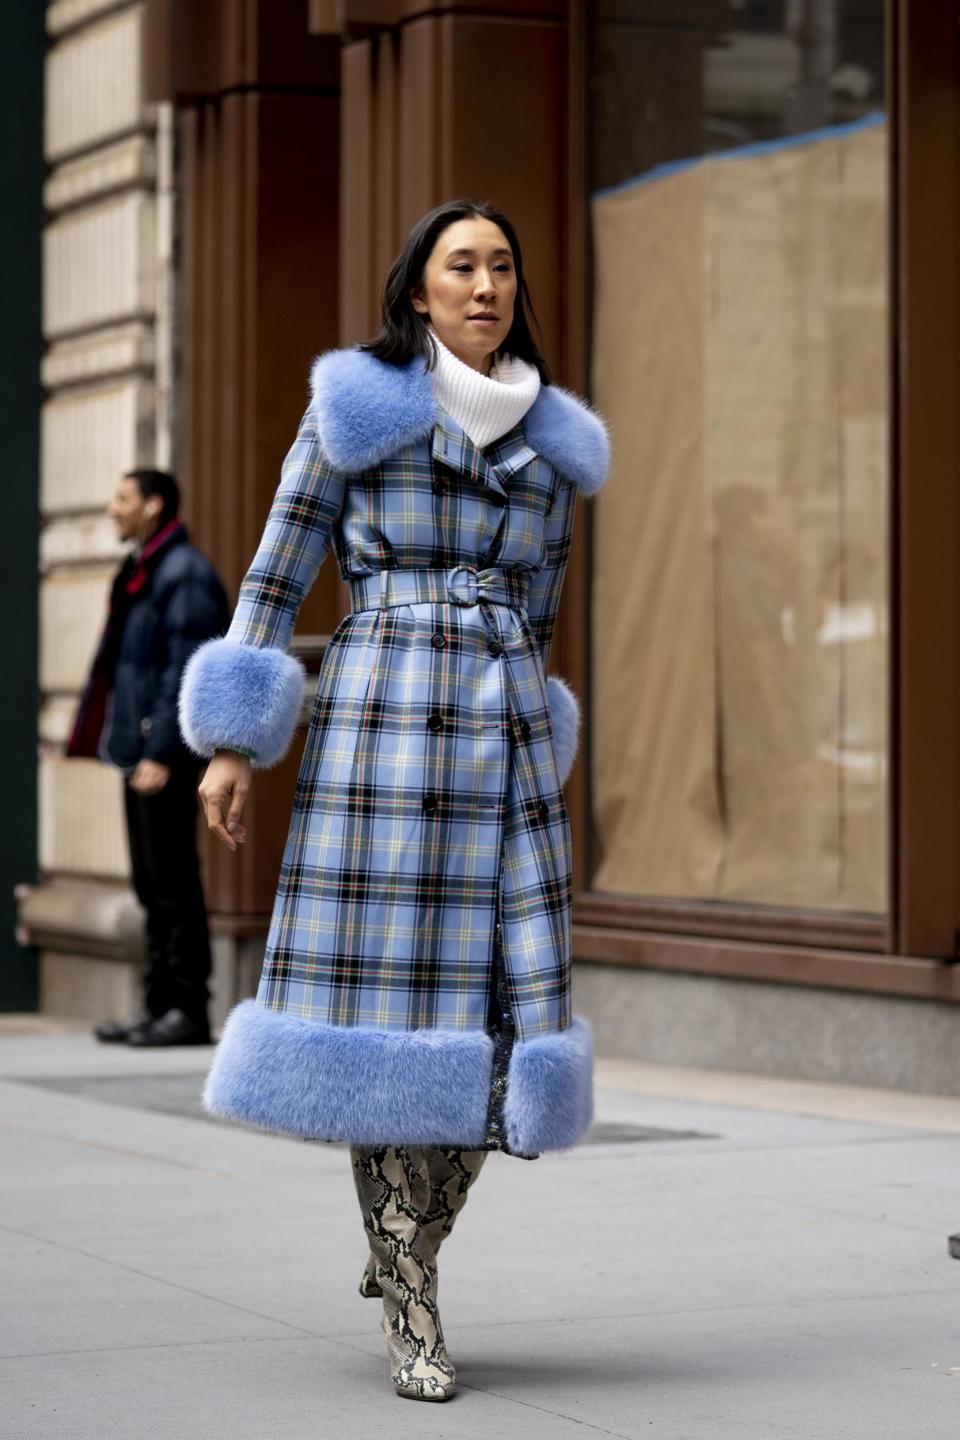 Head of Fashion Partnerships at Instagram, Eva Chen, wearing Paris Texas boots during NYFW in September 2019 (IMAXtree)